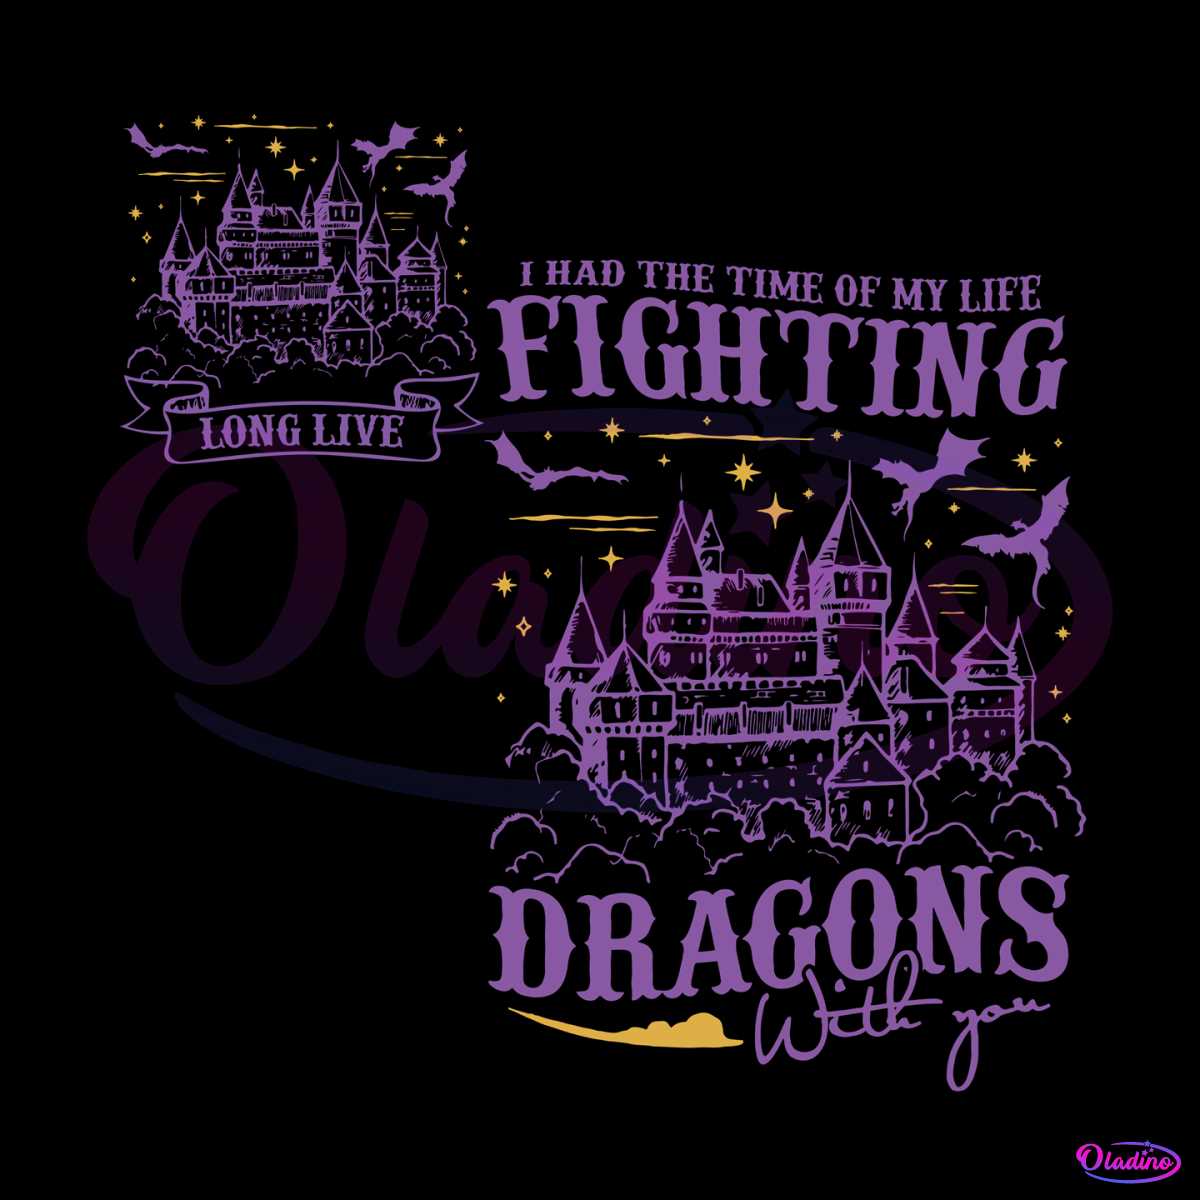 long-live-fighting-dragon-with-you-taylor-album-svg-cricut-file